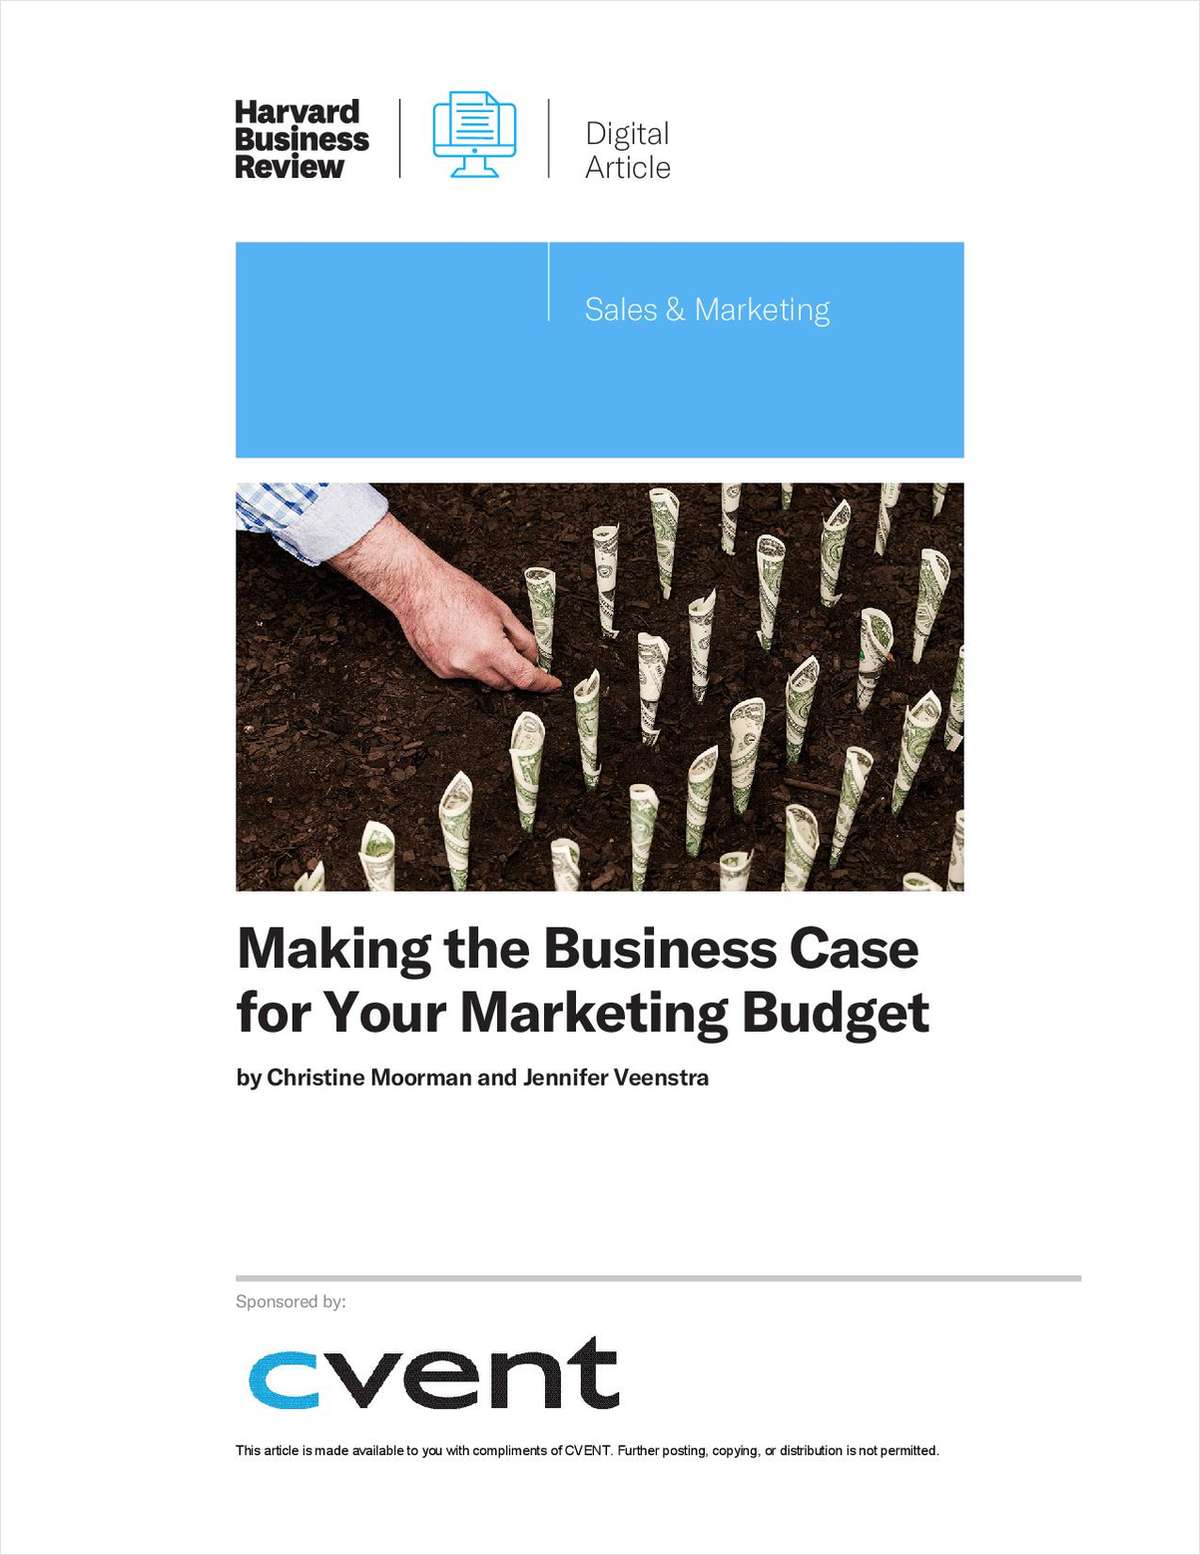 Making the Business Case for Your Marketing Budget